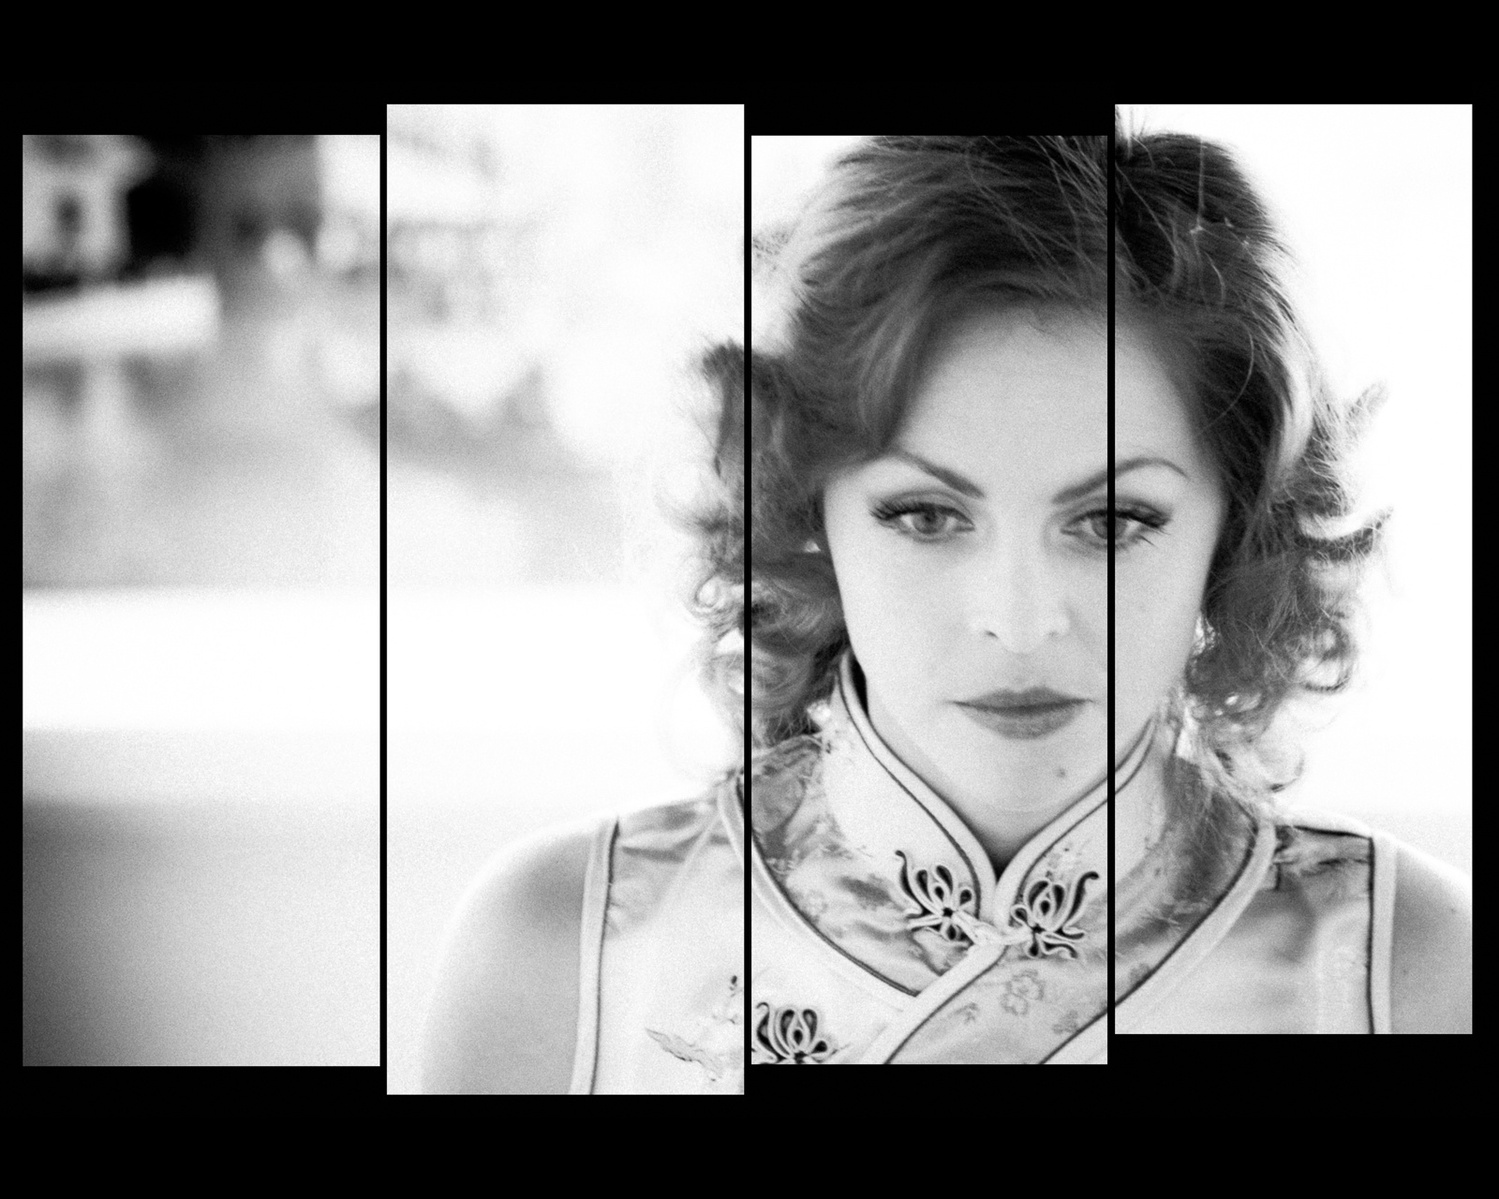 Staggered film strip of pale skinned young woman with vintage hairstyle gazing in thought